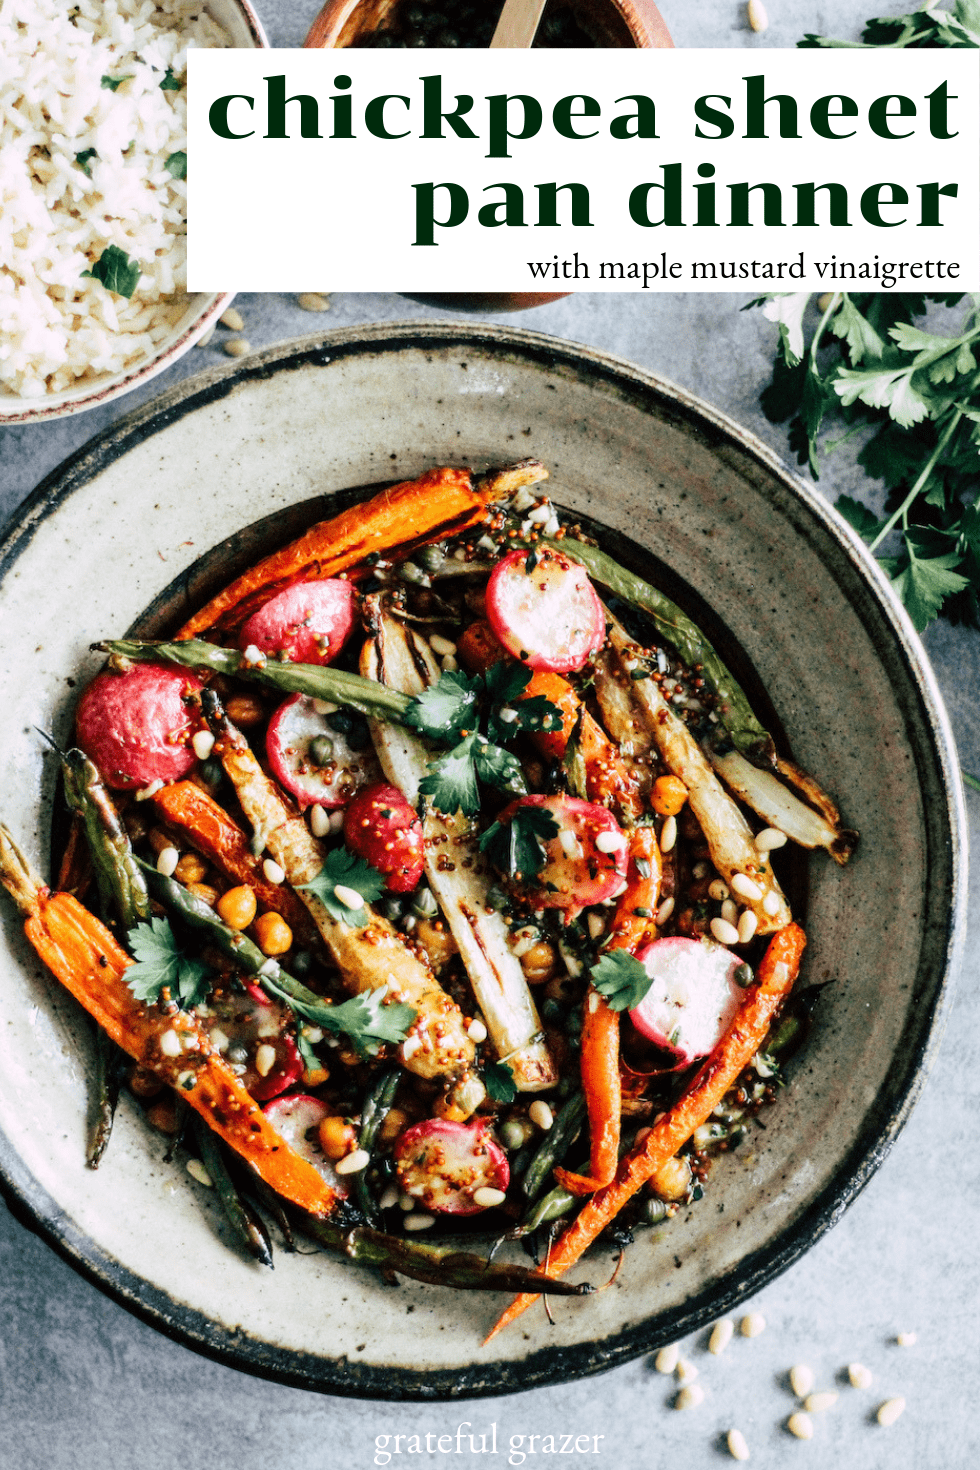 Black text reads, "Chickpea Sheet Pan Dinner with Maple Mustard Vinaigrette," and there is a stone bowl with chickpeas, carrots, green beans, and radish.